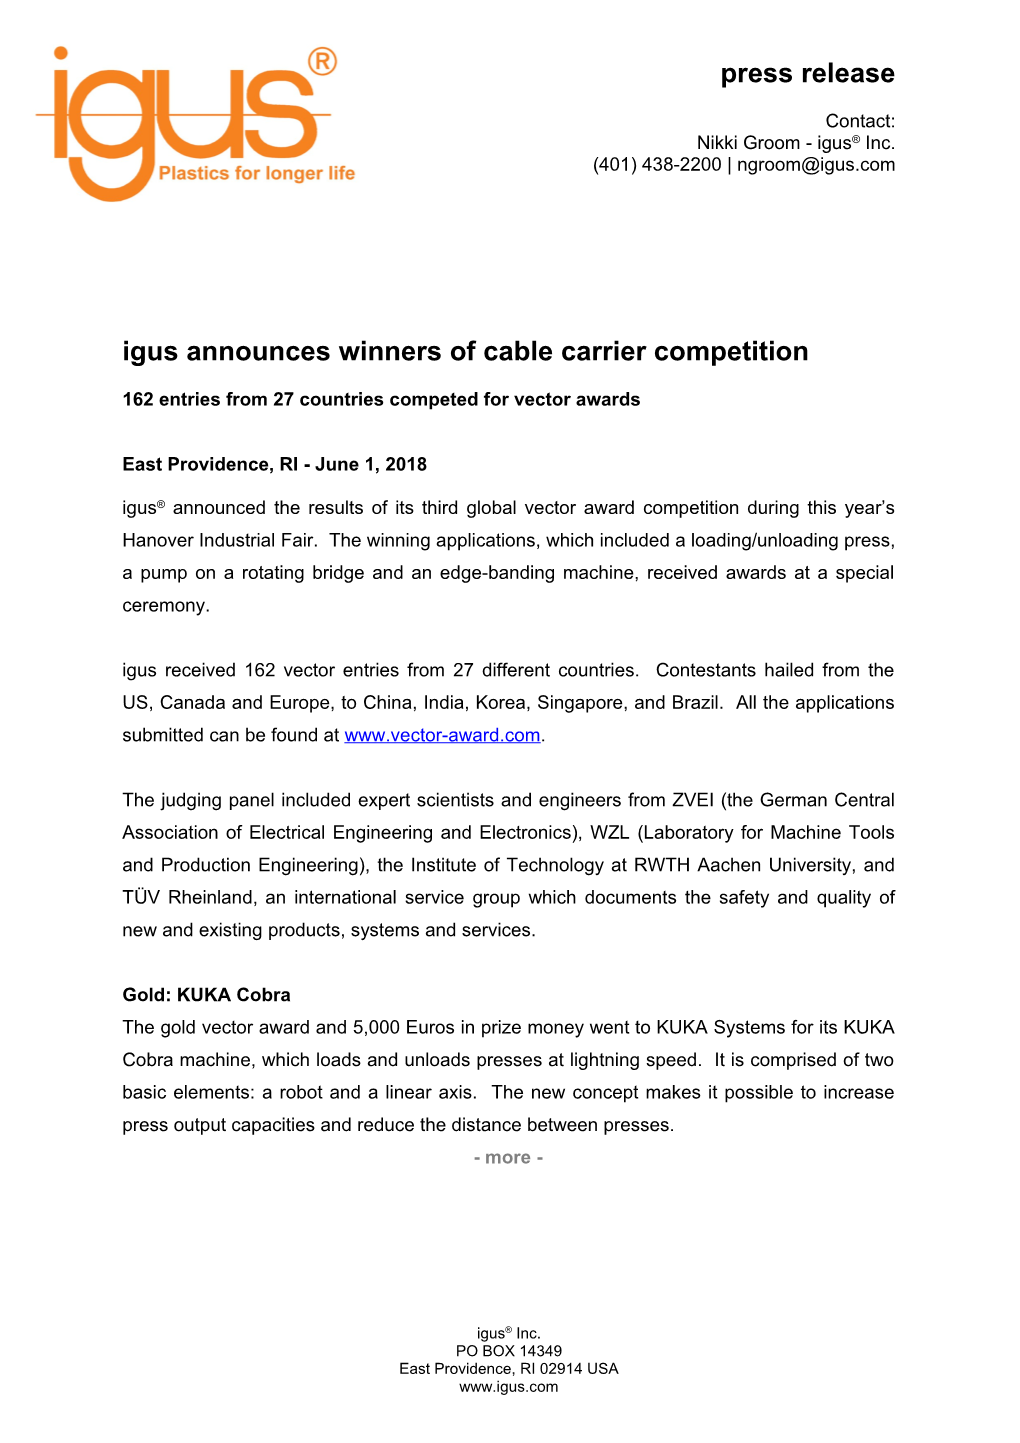 Igus Announces Winners of Cable Carrier Competition